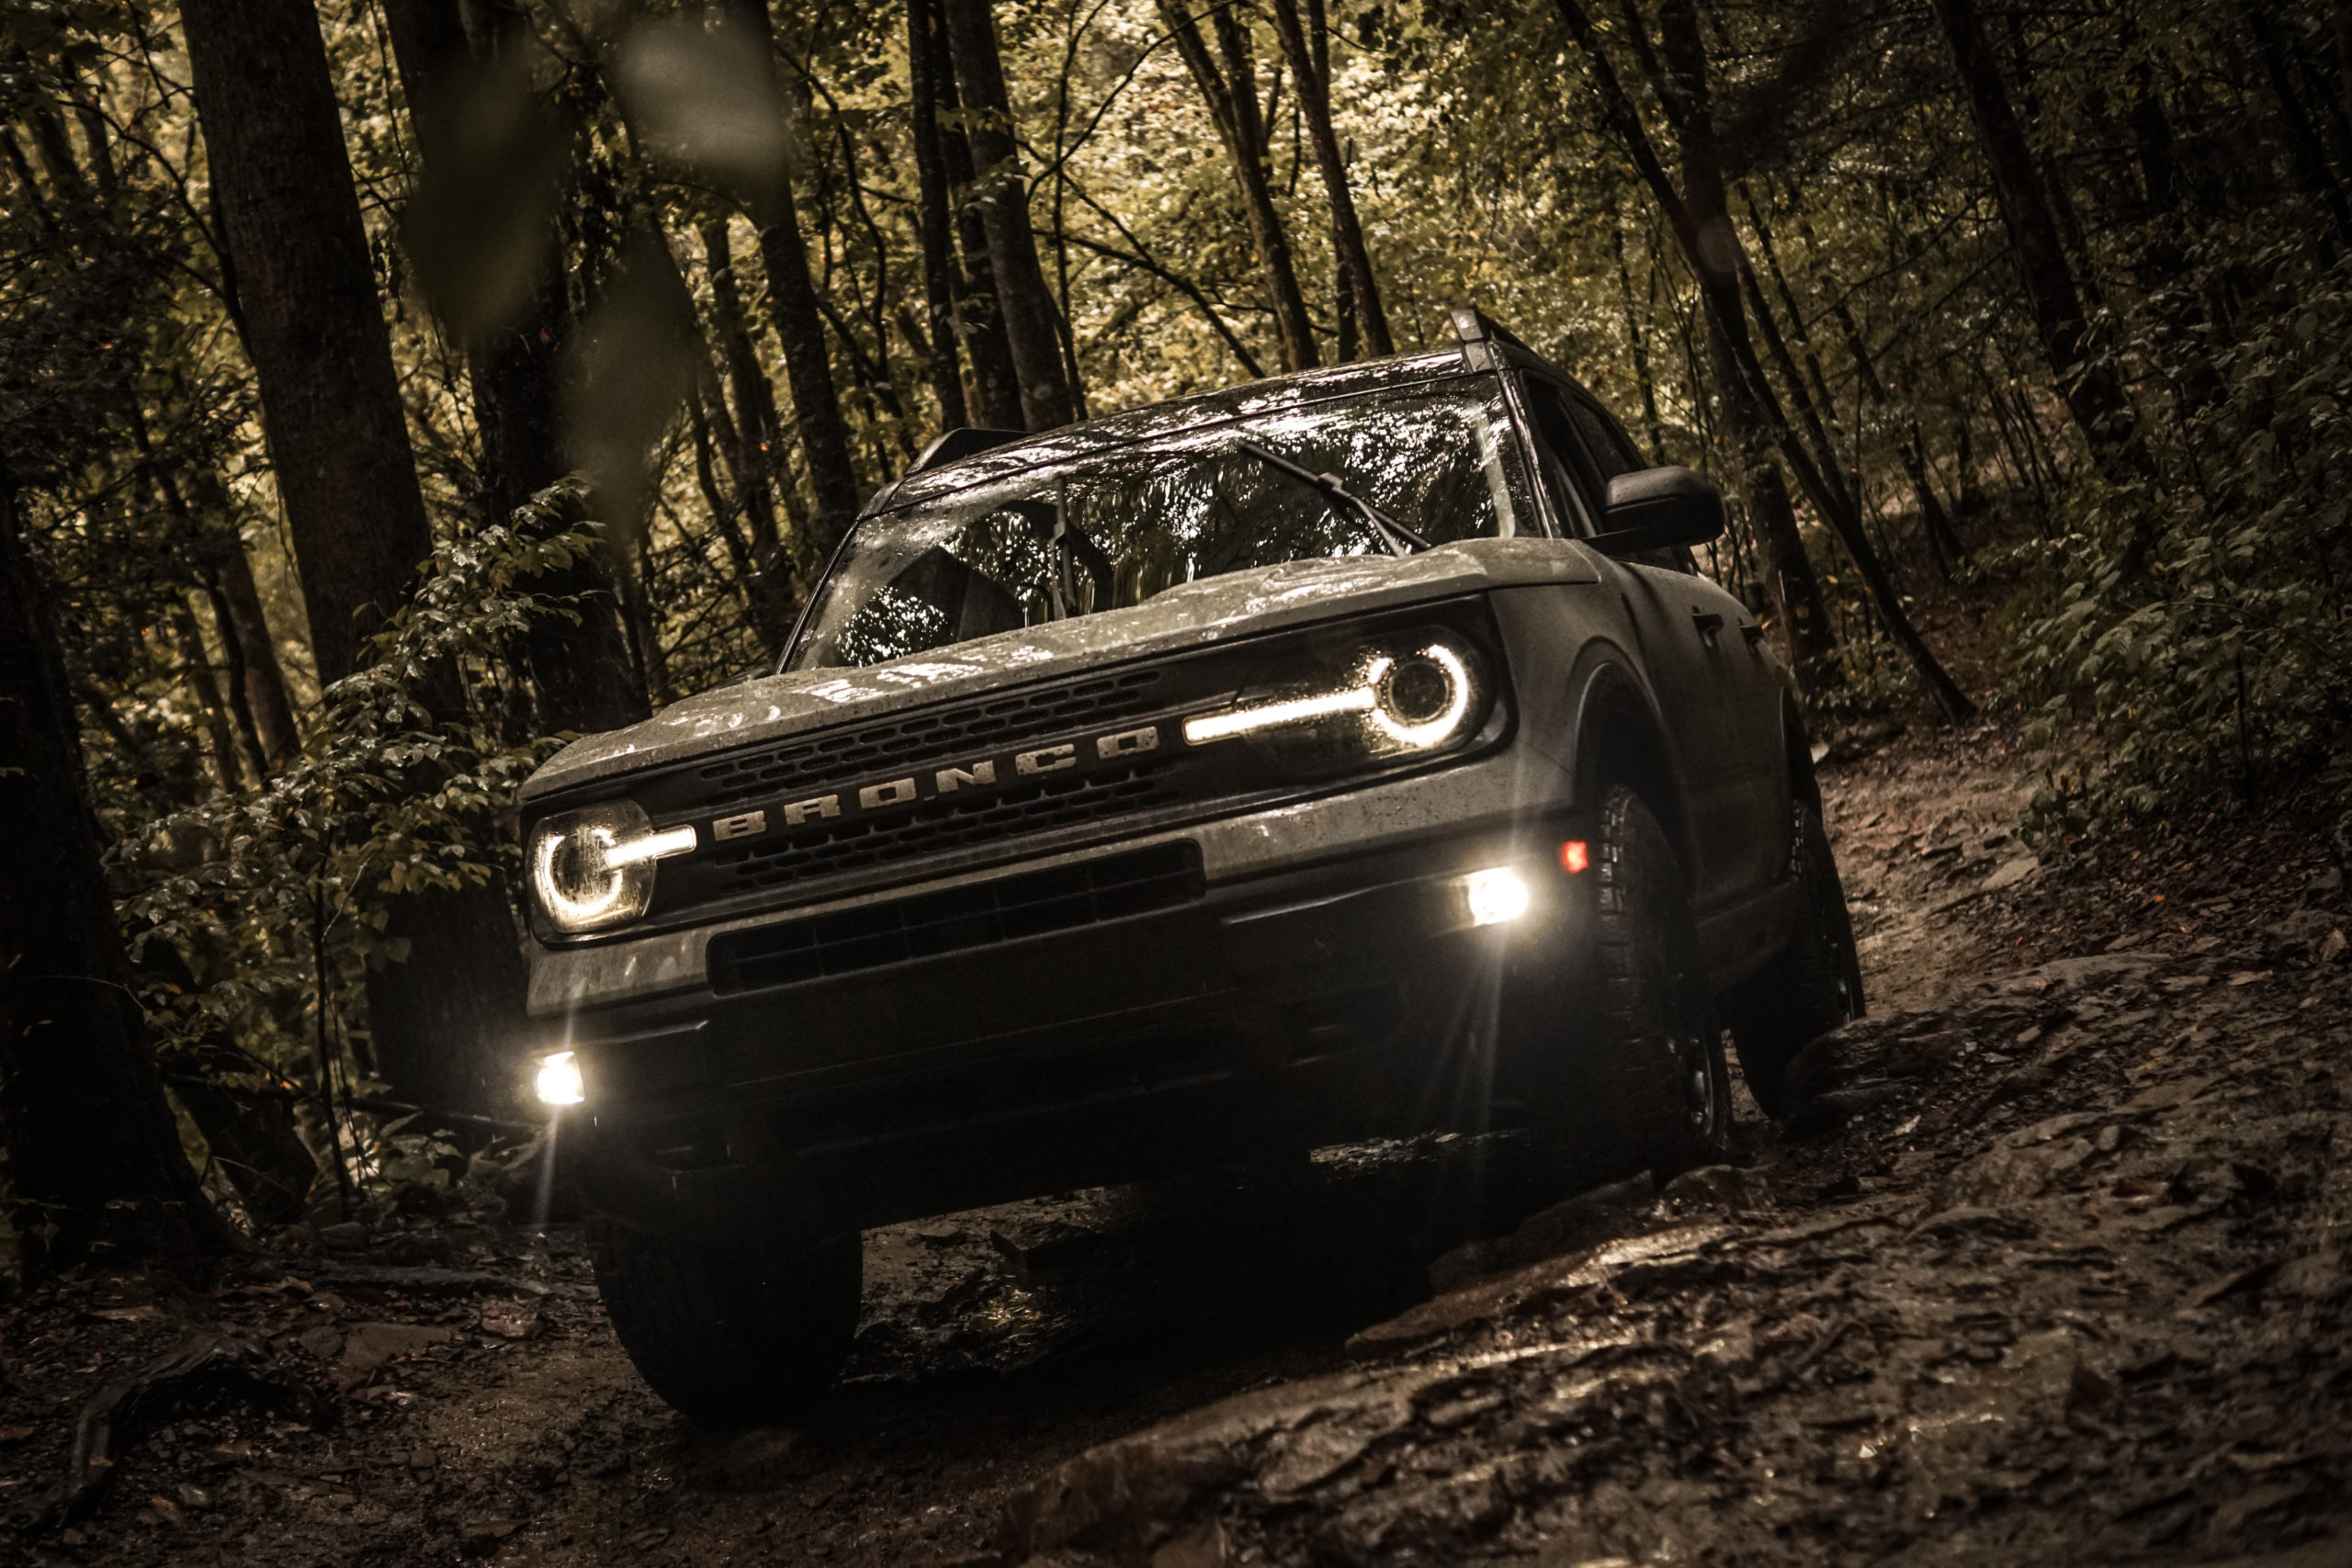 The Lifted Bronco Sport Takes on Any Terrain